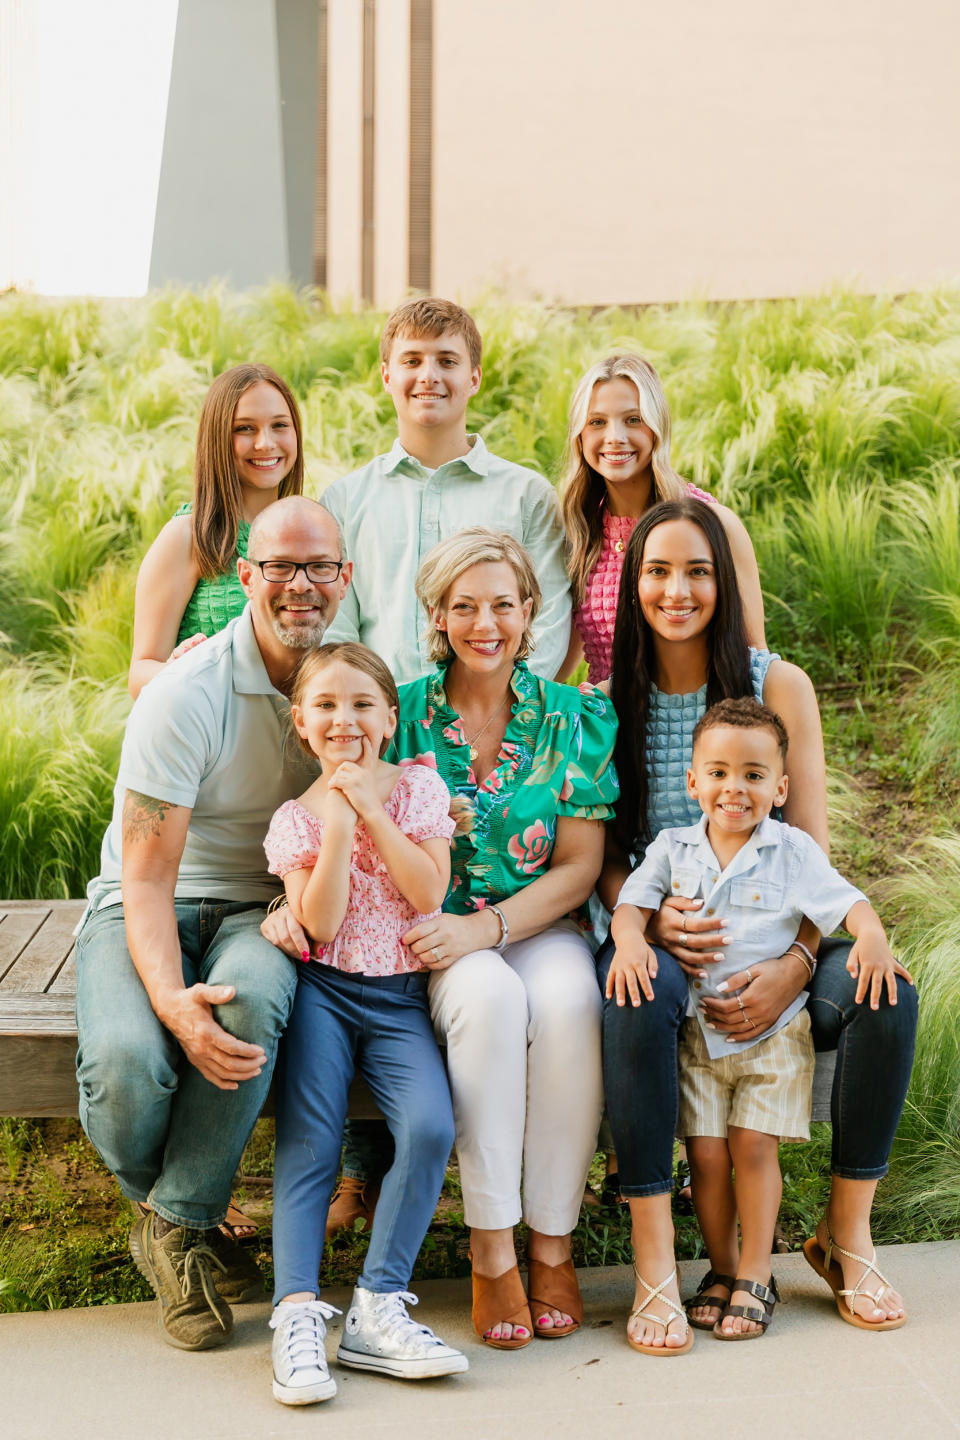 Jennifer McMillan, sitting center, is surrounded by her family. Her husband, Tony McMillan, and bonus daughter, Lillian McMillan, are sitting on the left. Daughter Peyton Washington and grandson Weston Blackburn are sitting on the right. Back row, from left to right, includes daughter Maggie Washington, son Thomas Washington and daughter Olivia Washington.  (Courtesy Emily Hart Photography)